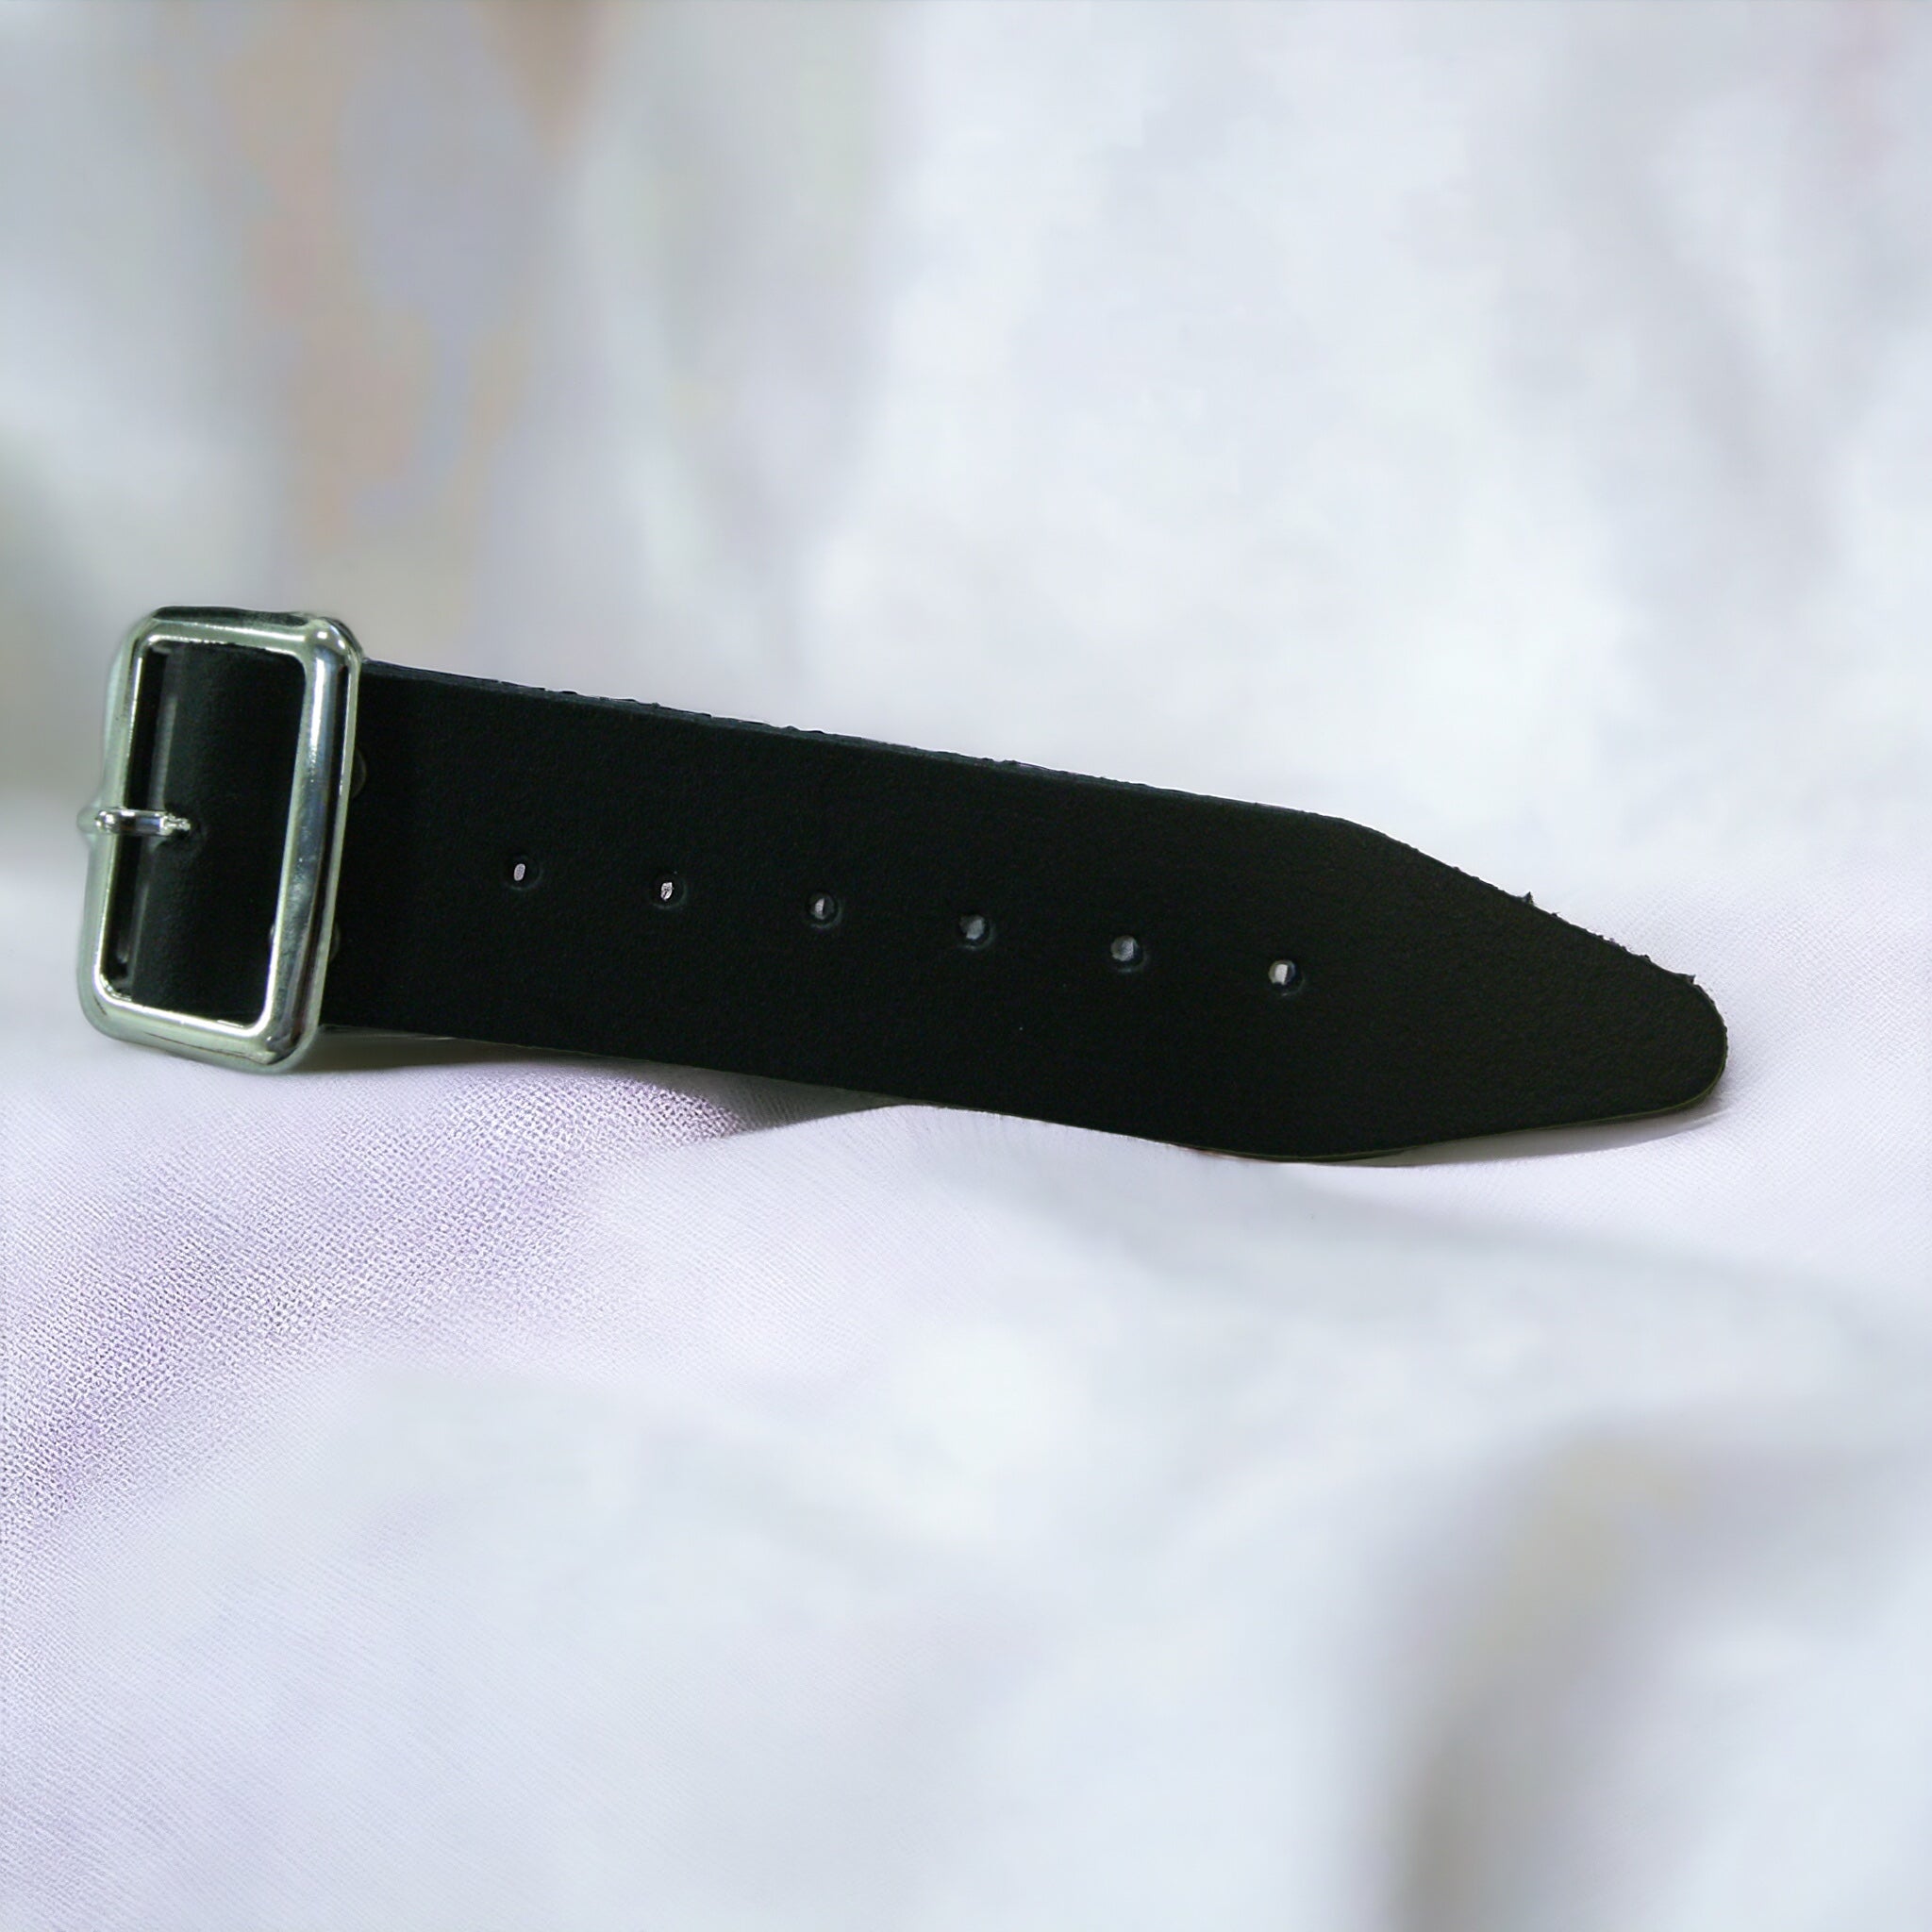 Kilt strap extender 1 1/2" with buckle